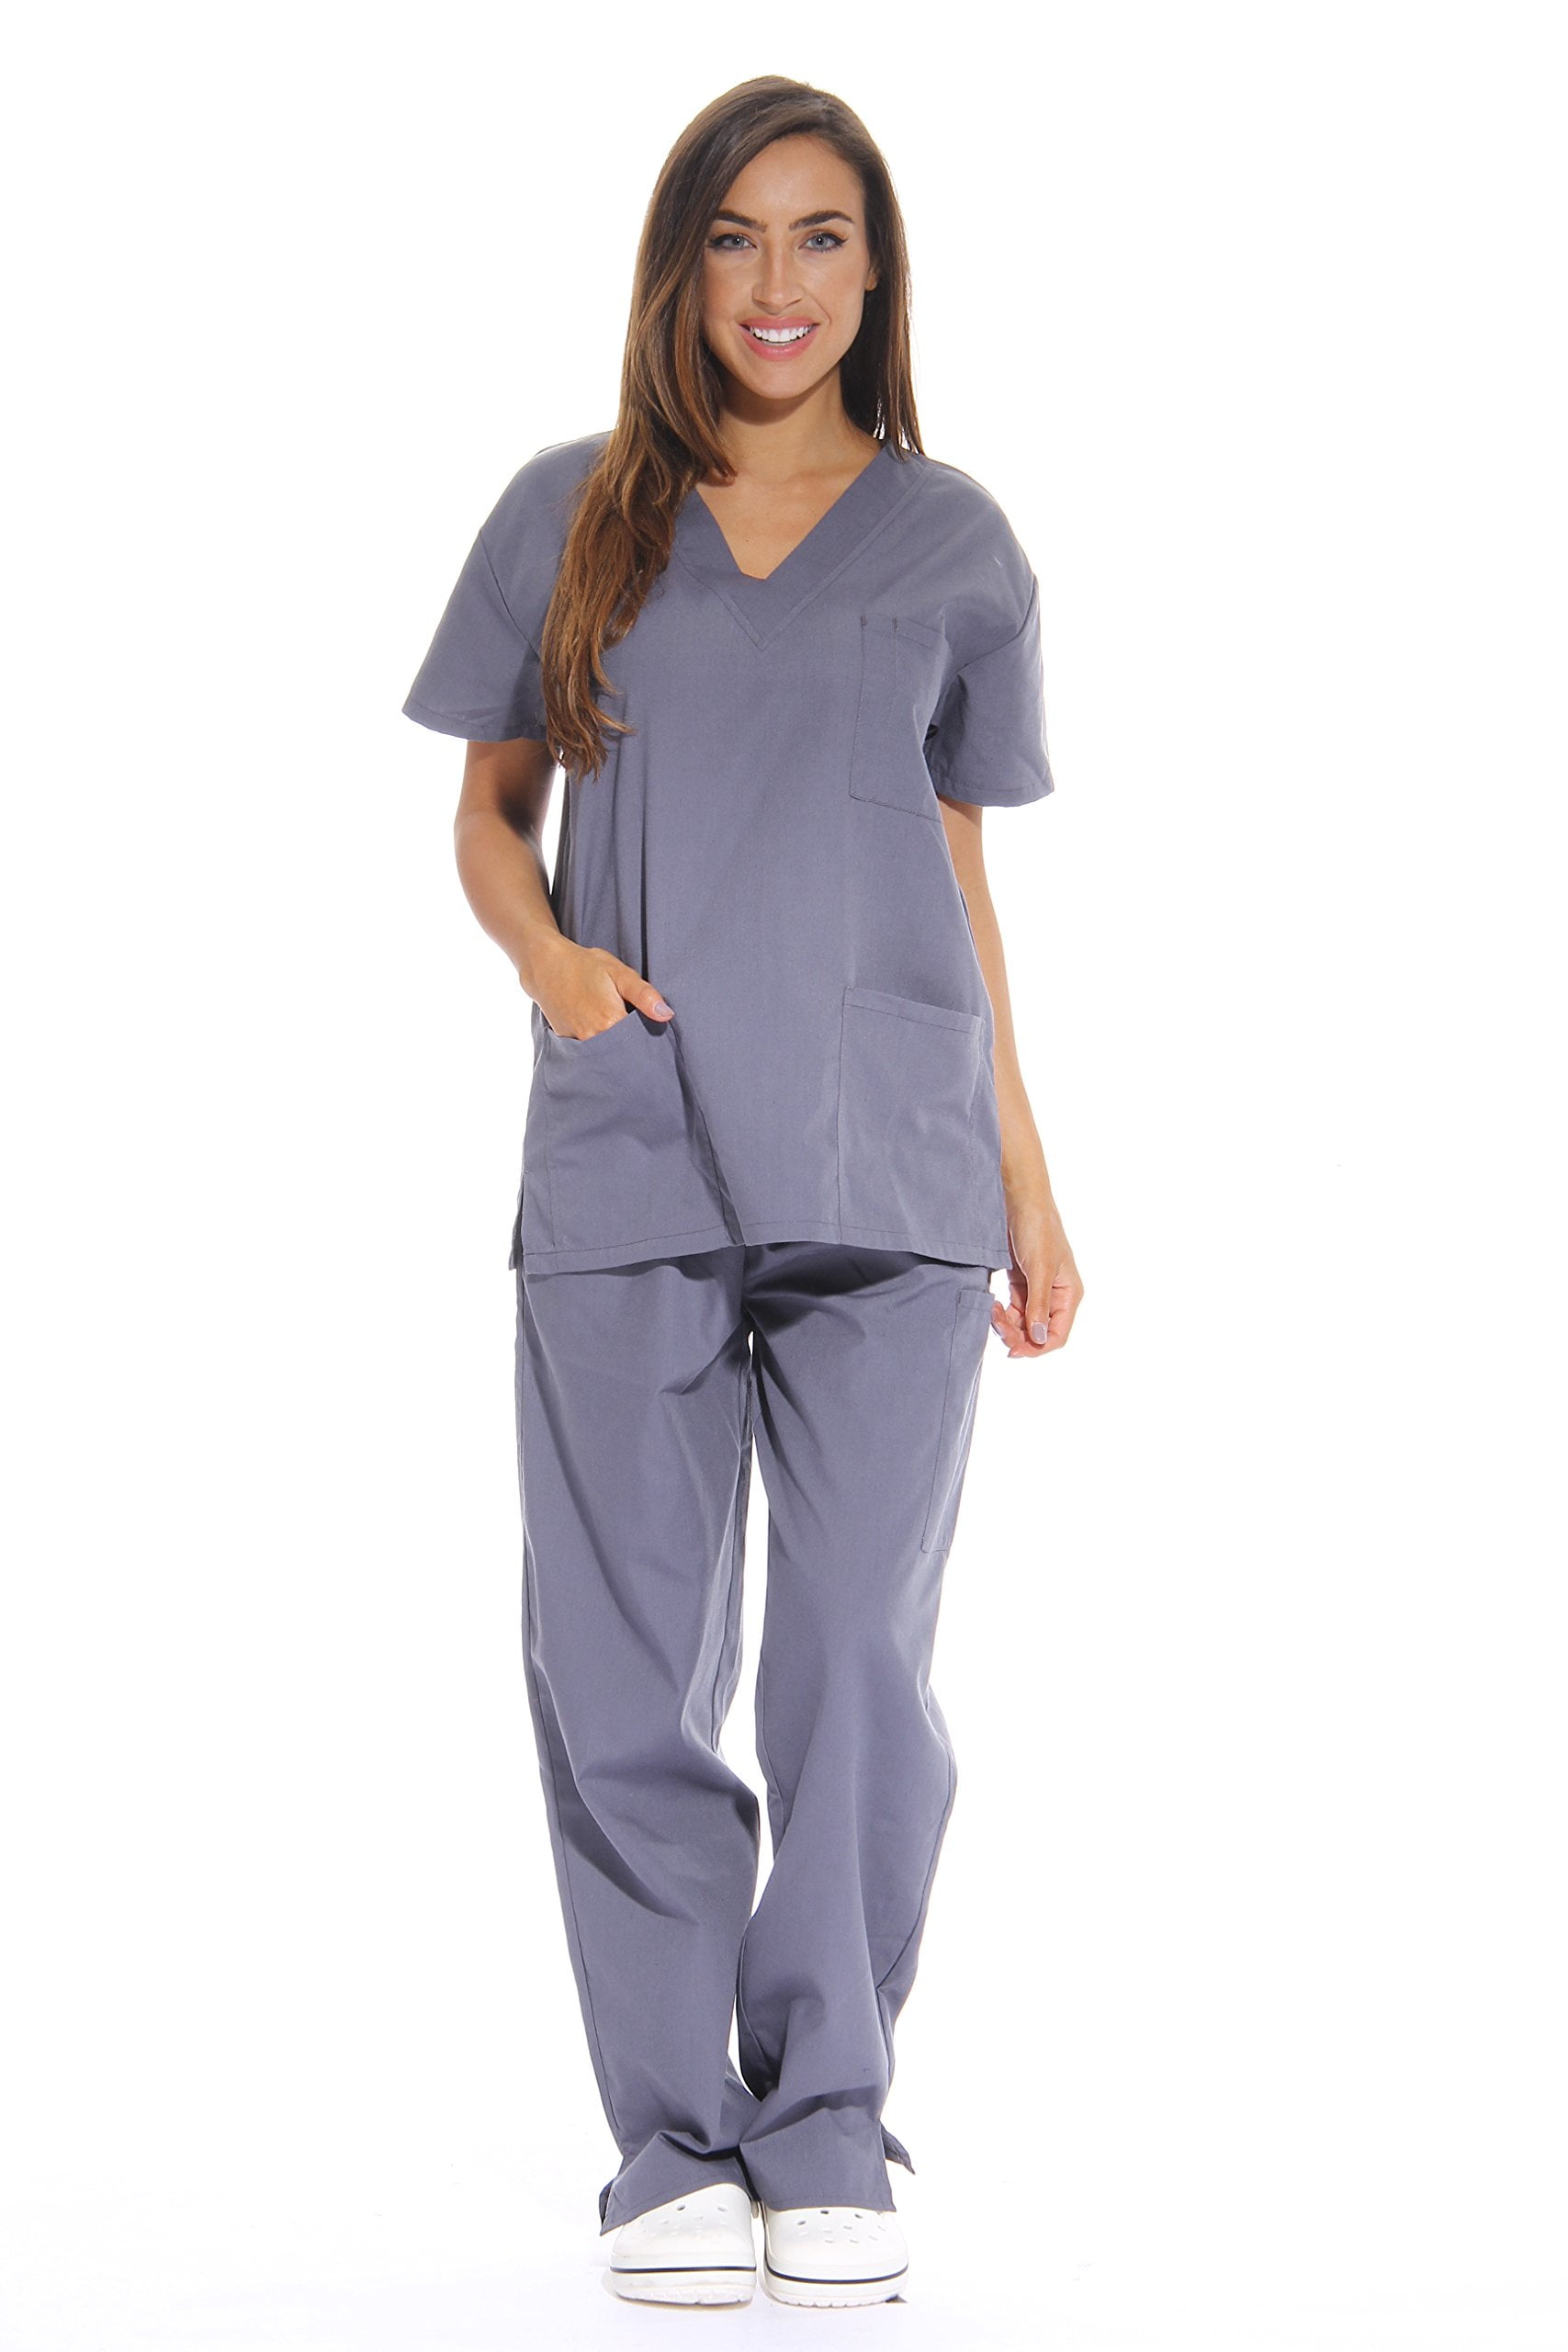 Just Love Women's Medical Scrubs - Six Pocket Set with Comfortable V ...